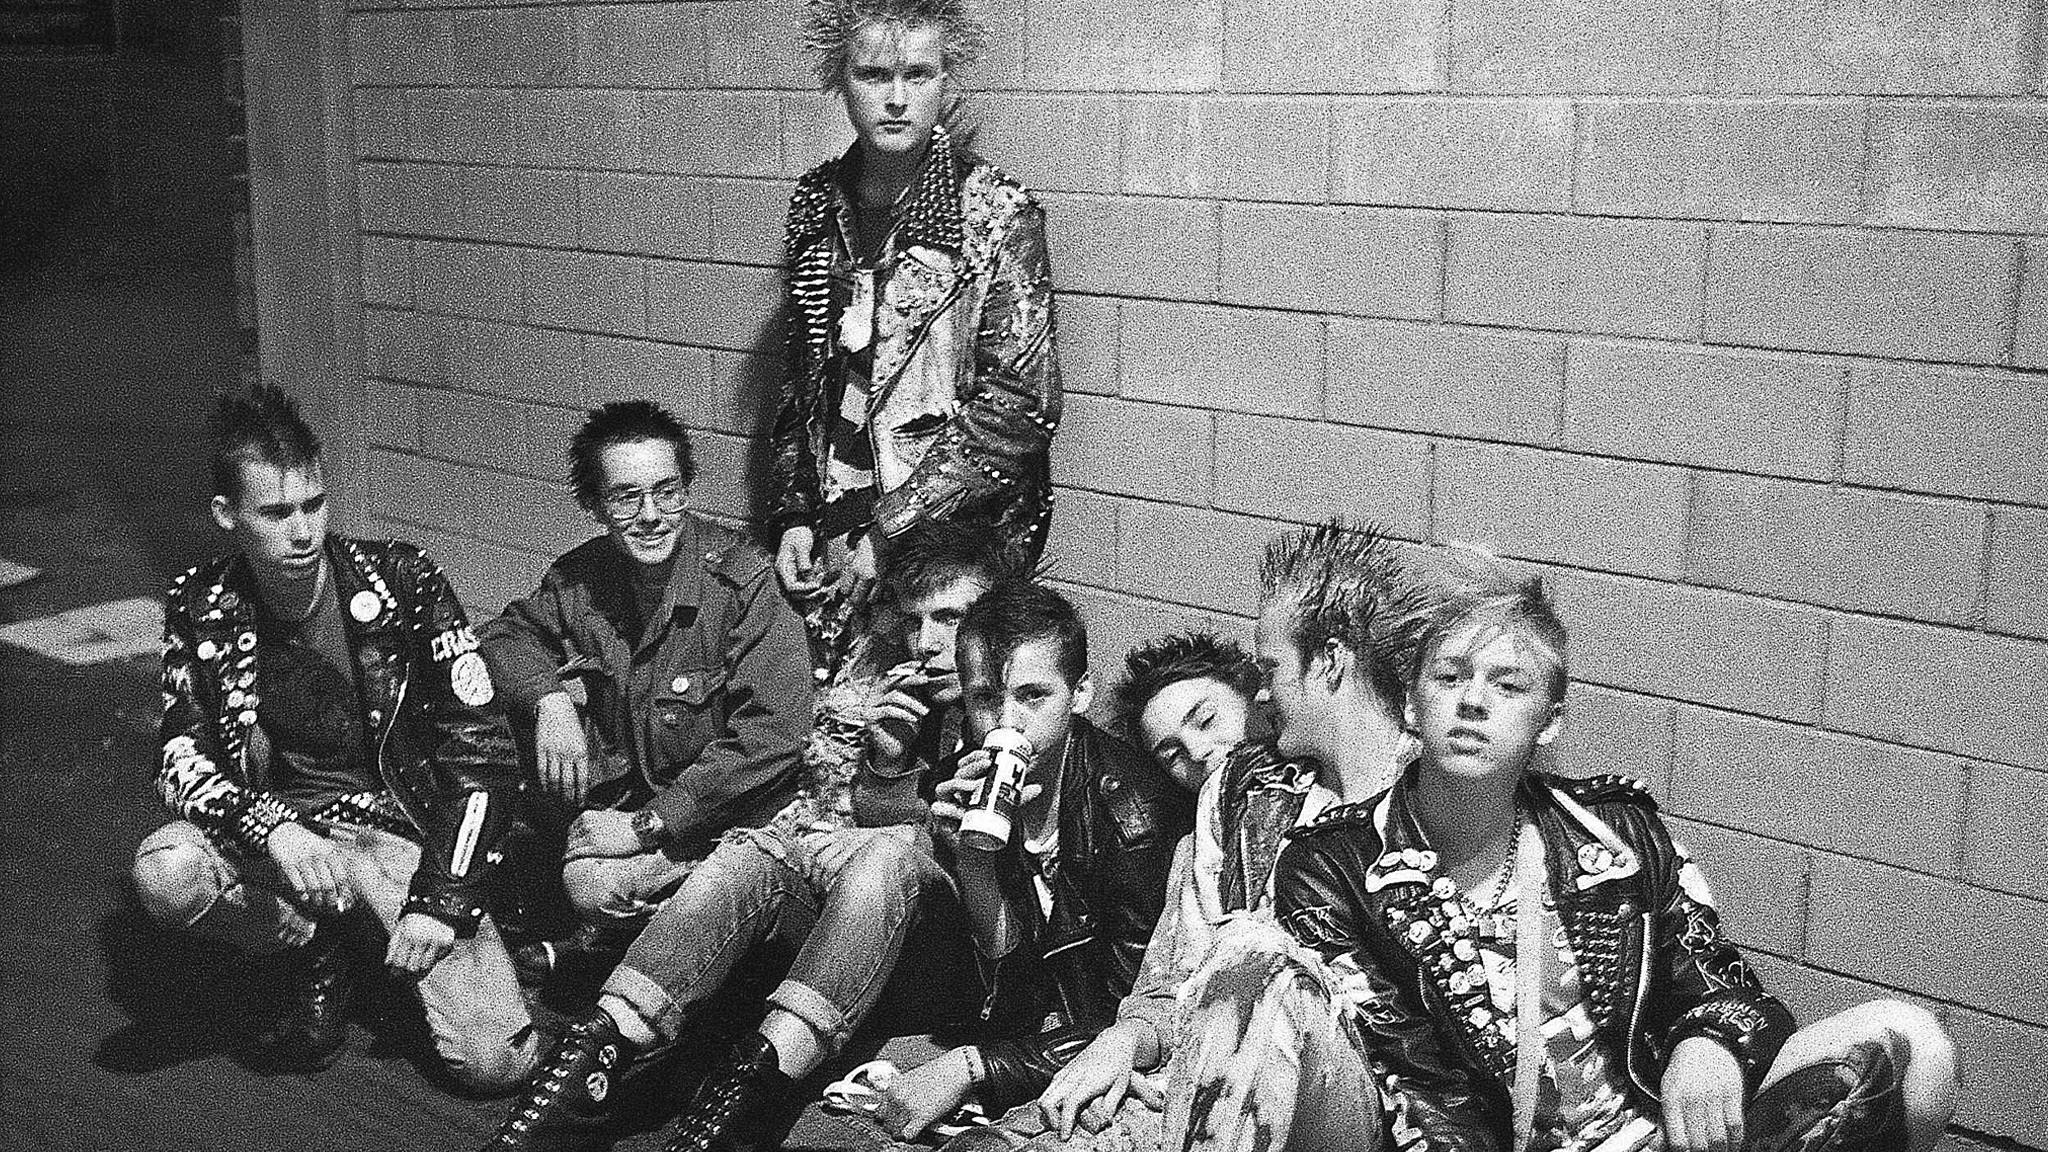 In pictures: The bands, fans and mayhem of the ’80s Swedish Råpunk movement